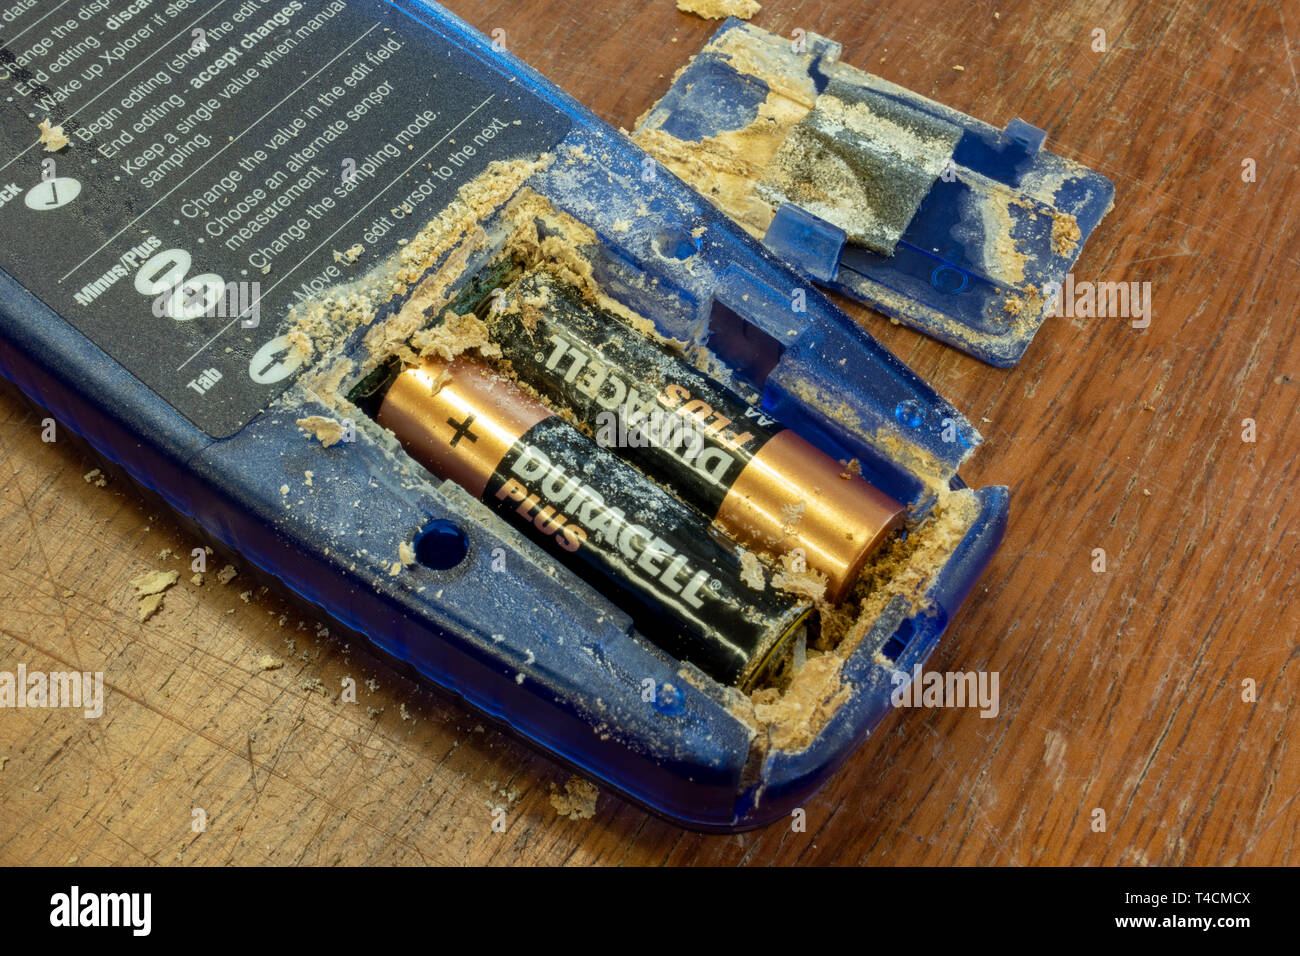 the-battery-compartment-of-an-electronic-device-with-extreme-case-of-alkaline-battery-corrosion-lr6aa15a-T4CMCX.jpg